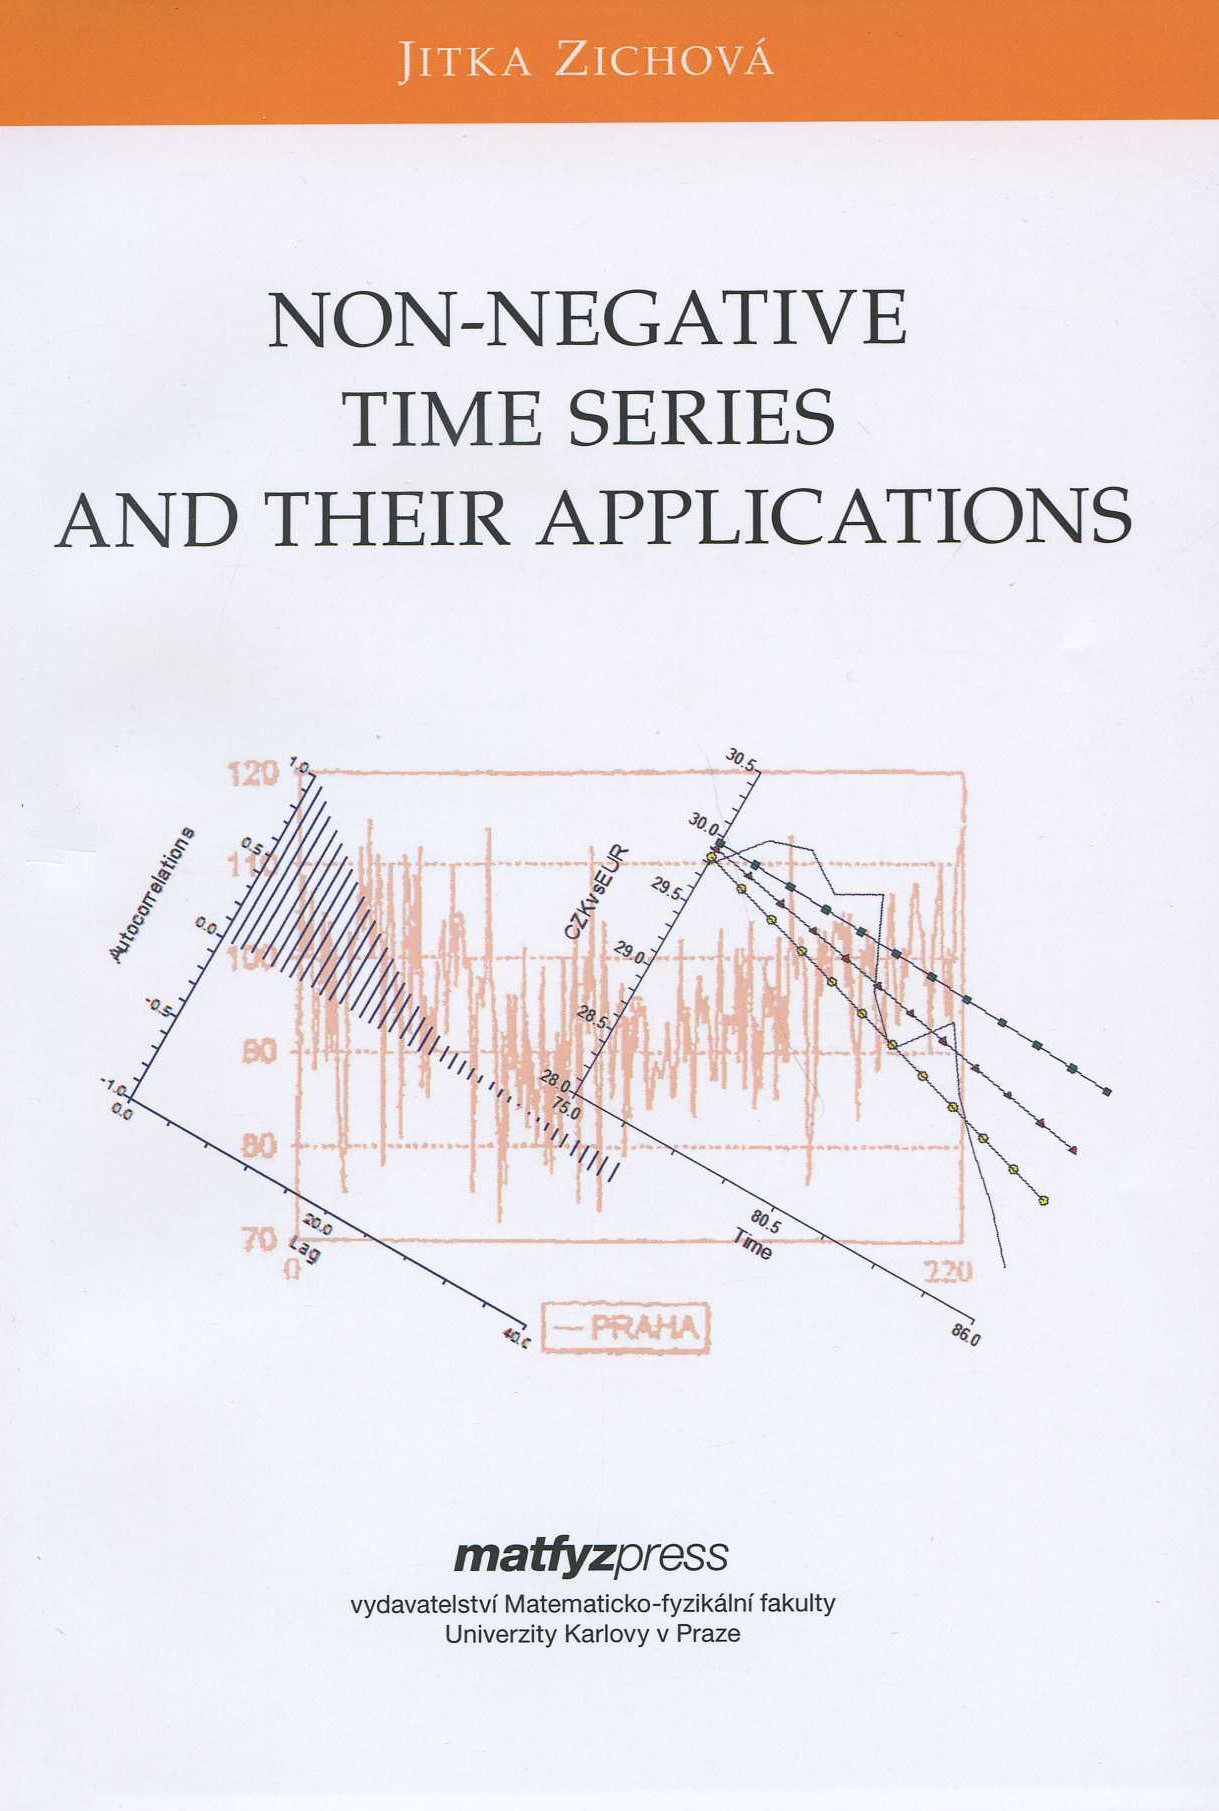 Non-Negative time series and their applications